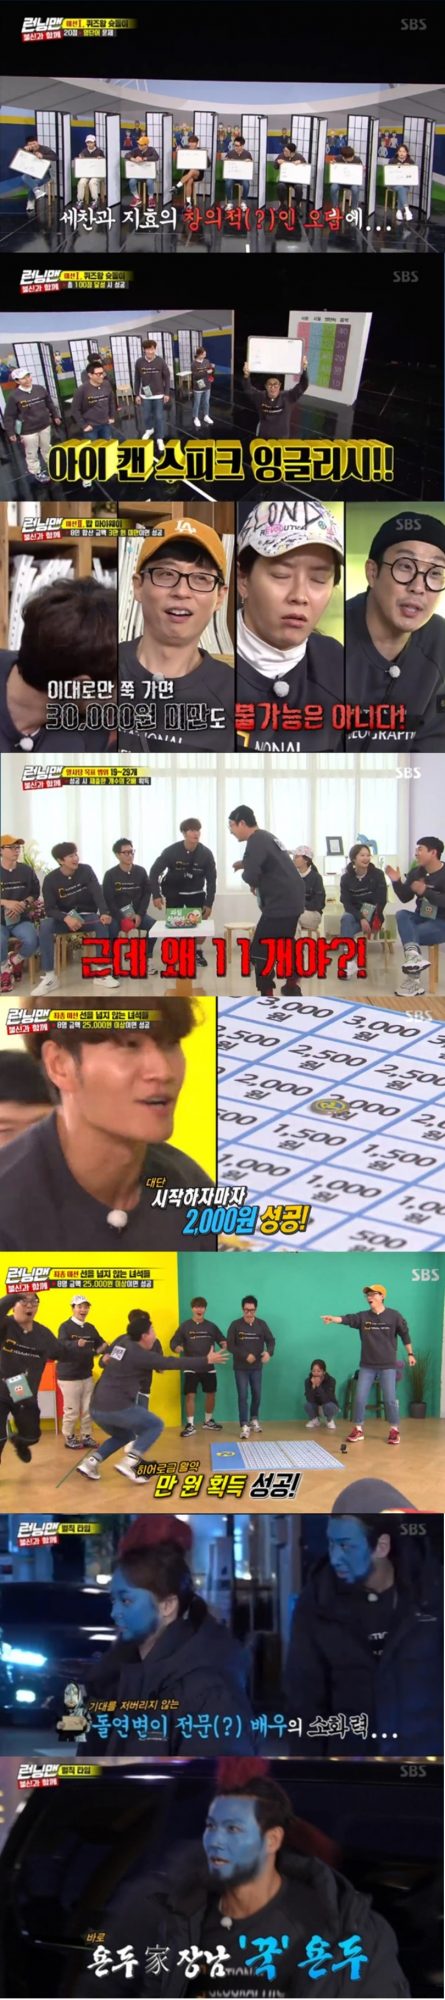 SBS Running Man kept the top spot in the same time zone of 2049 target TV viewer ratings.According to Nielsen Korea, a TV viewer rating research institute, Running Man, which was broadcast on the 1st, ranked first in the same time zone entertainment with 2049 target TV viewer ratings, an indicator of topicality, surpassing MBCs Masked Wang and KBS2s Ears as Donkey Ears, with 4.1% (based on the second part of the Seoul metropolitan area furniture TV viewer ratings).The average TV viewer ratings were 5.5% in the first part and 7.6% in the second part, while the highest TV viewer ratings per minute rose to 8.4%.The broadcast was featured in a special united race with distrust, which was set up for members who had been suspicious and fraught in the past few weeks.In the first mission, The King of Quiz had to say unanimous answers, and there were difficulties, from all kinds of fouls to the wrong answers of Jeon So-min, but fortunately all the answers were correct.In the second mission Bob My Way, Jeon So-min was prominent.One of the eight different menus with different prices was private, and if the sum was less than 30,000 won, it was a mission to eat.Ji Suk-jin chose a high price soy sauce, while Jeon So-min chose a boiled egg of 500 won and all the members ate well within the sum of the sum.The third, Answer the category, was a mission that everyone should tell in eight seconds.As the commission failed, the members began to show distrust toward each other again and laughed.Fortunately, in the Boys who do not cross the line, which throws the final mission coin into the box, they were able to win 10,000 won in the performance of Yang Se-chan.Yang Se-chan finally won the penalty exemption by ranking first by member, and Jeon So-min and Lee Kwang-soo were penalized as they ranked 7th and 8th respectively.The two pointed to Kim Jong-kook as an additional penalty; the three sold Bungeo-pang on the street, dressed as Yondu characters.The three humiliation sales sites rose to 8.4% of the highest TV viewer ratings per minute, accounting for the best one minute.